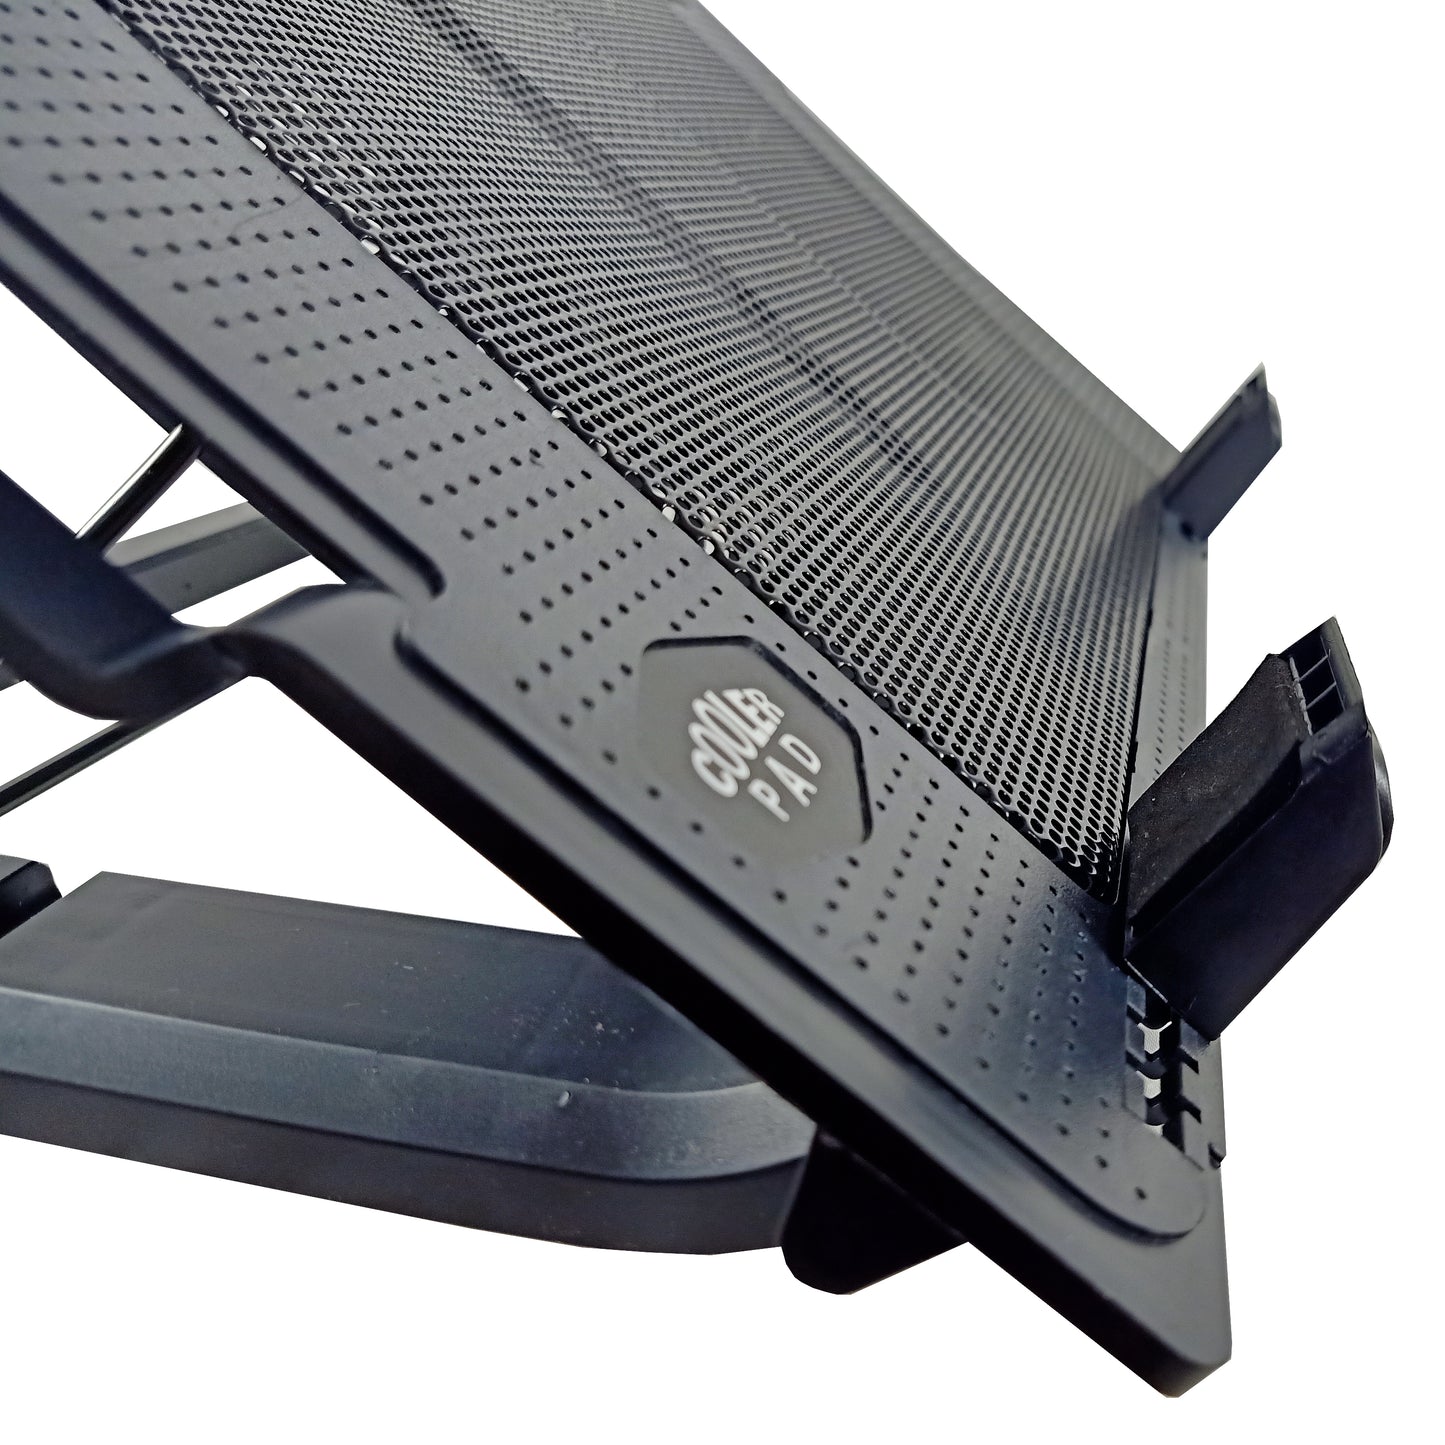 NOTEBOOK COOLING PAD ERGOSTAND N18